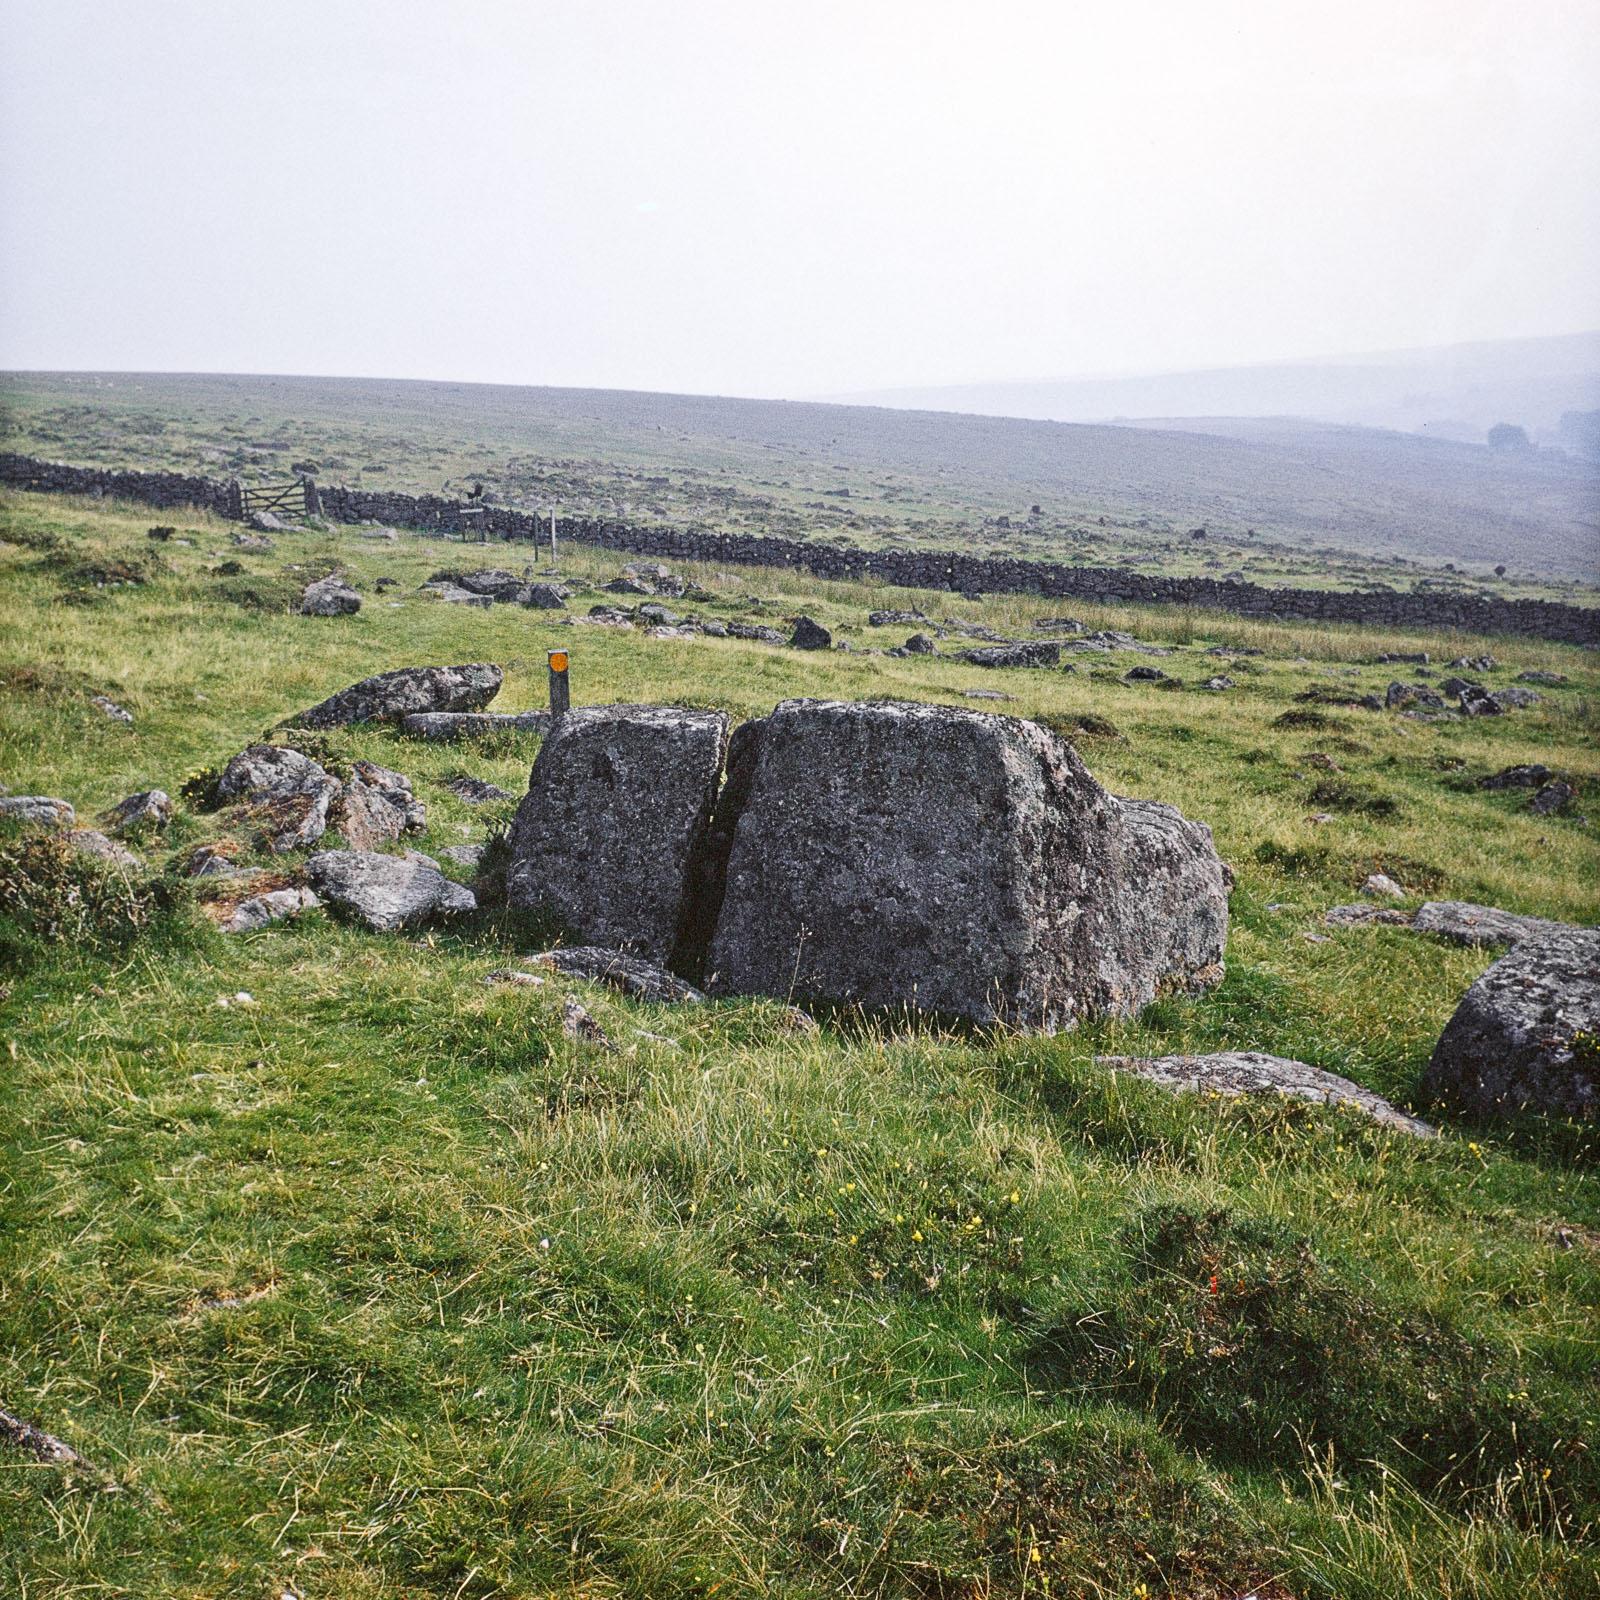 a large boulder in a green field with a small orange circular dot painted on the boulder